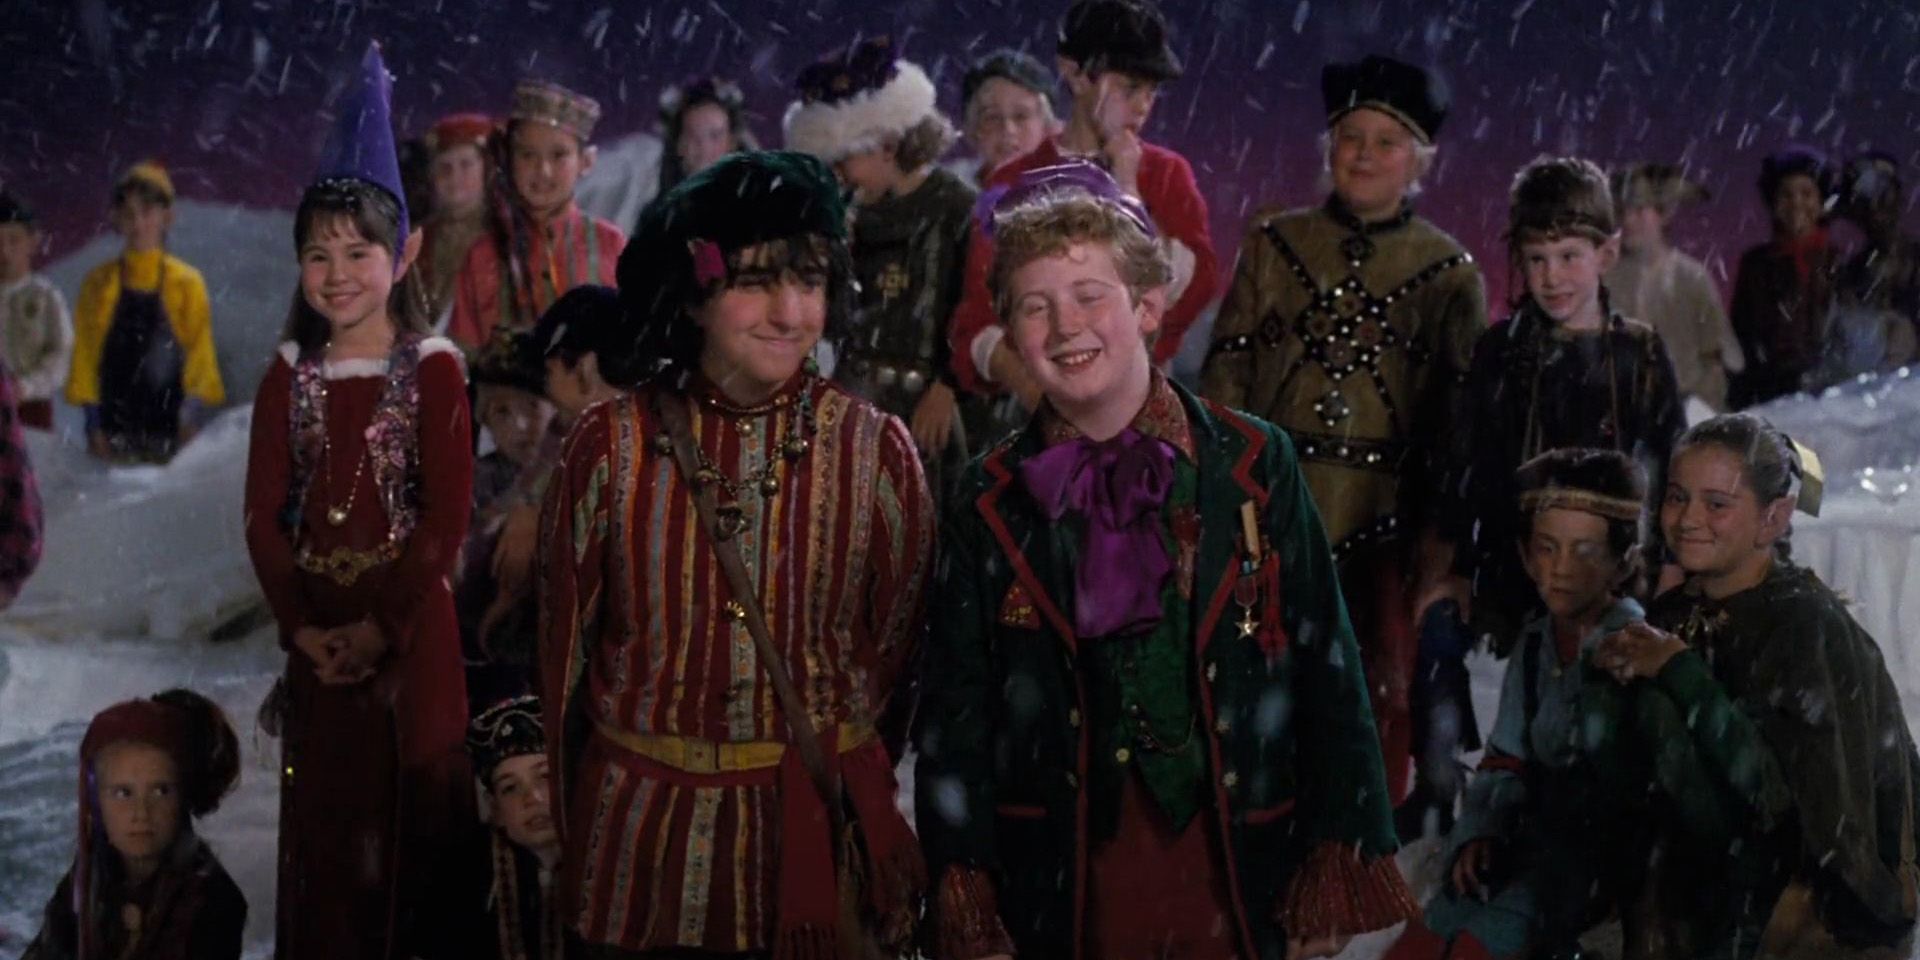 The elves in The Santa Clause